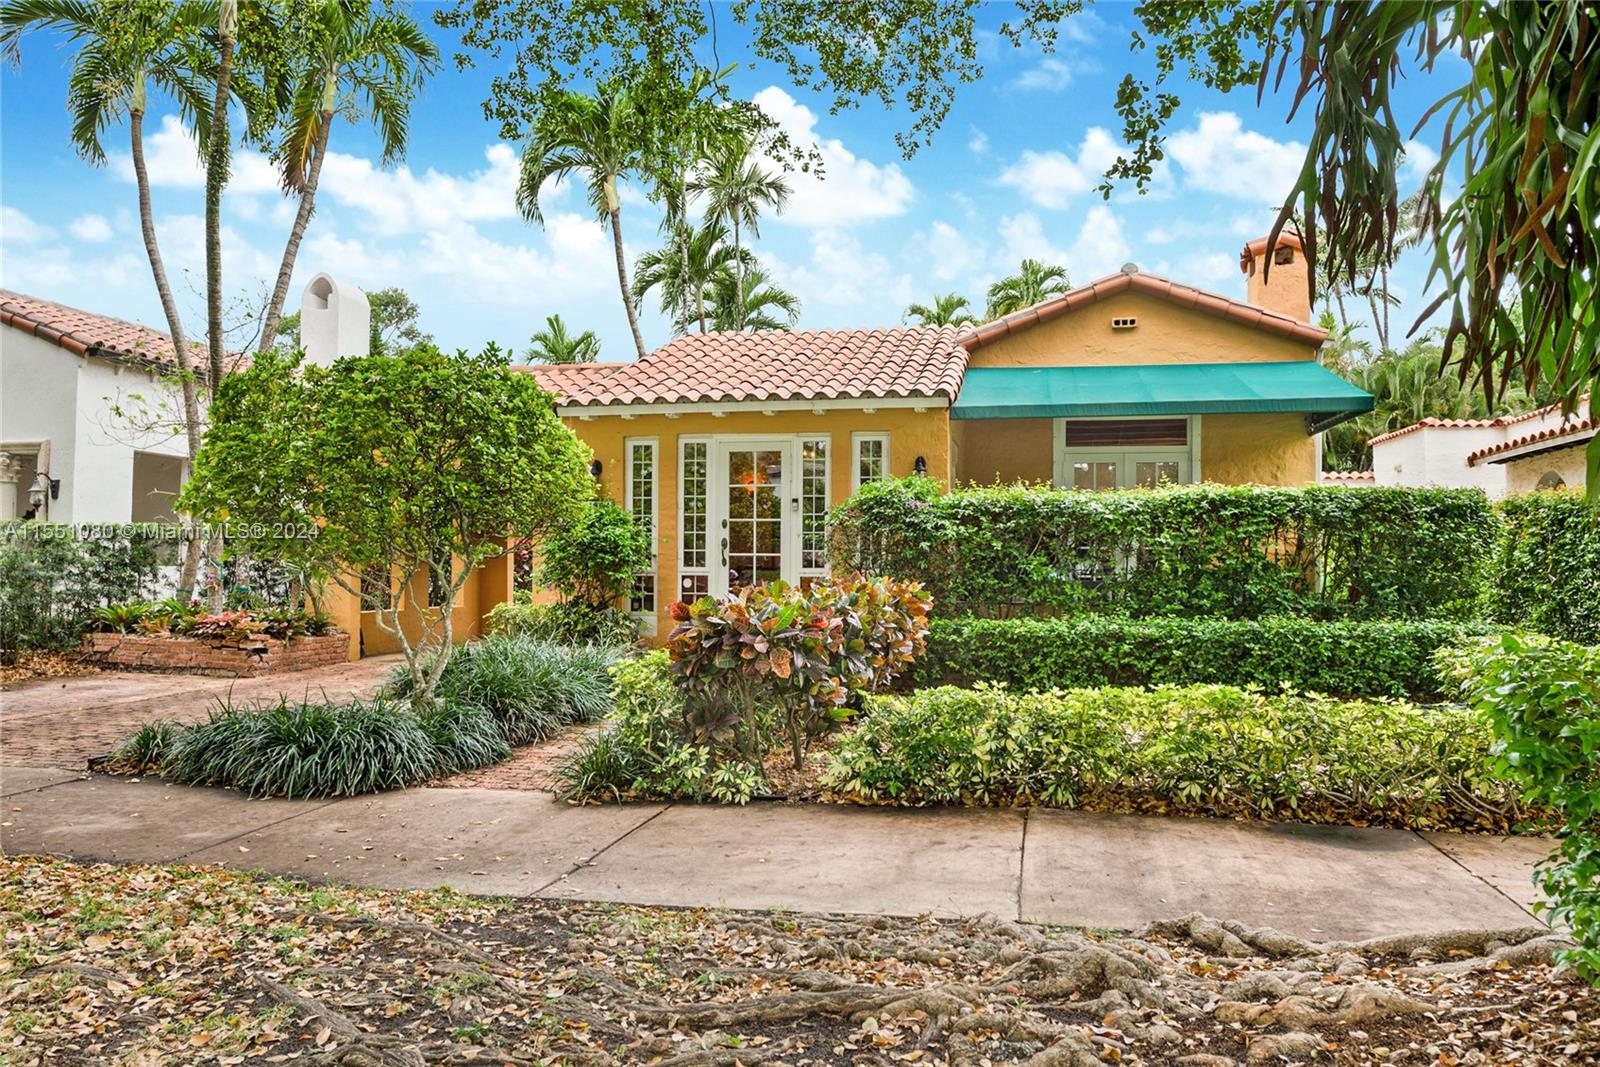 South Coral Gables, just off of S. Alhambra Cir. this old Spanish home epitomizes timeless charm. Located in the sought-after Sunset Elementary School district, it offers a serene historic retreat amidst lush surrounding homes. Classic features like terracotta roof tiles and arched doorways greet visitors along a tree-lined pathway. Inside, a sunlit foyer with intricate tile work welcomes guests to a spacious living room with wooden beams and vaulted ceilings. The kitchen, with custom cabinetry and granite countertops, invites culinary adventures. Two bedrooms, including a primary suite with an elegant en-suite bathroom along with a cozy den. A separate guest house offers an additional bedroom and bath - truly a versatile space. Outside, a brick paver patio for you to relax and entertain.